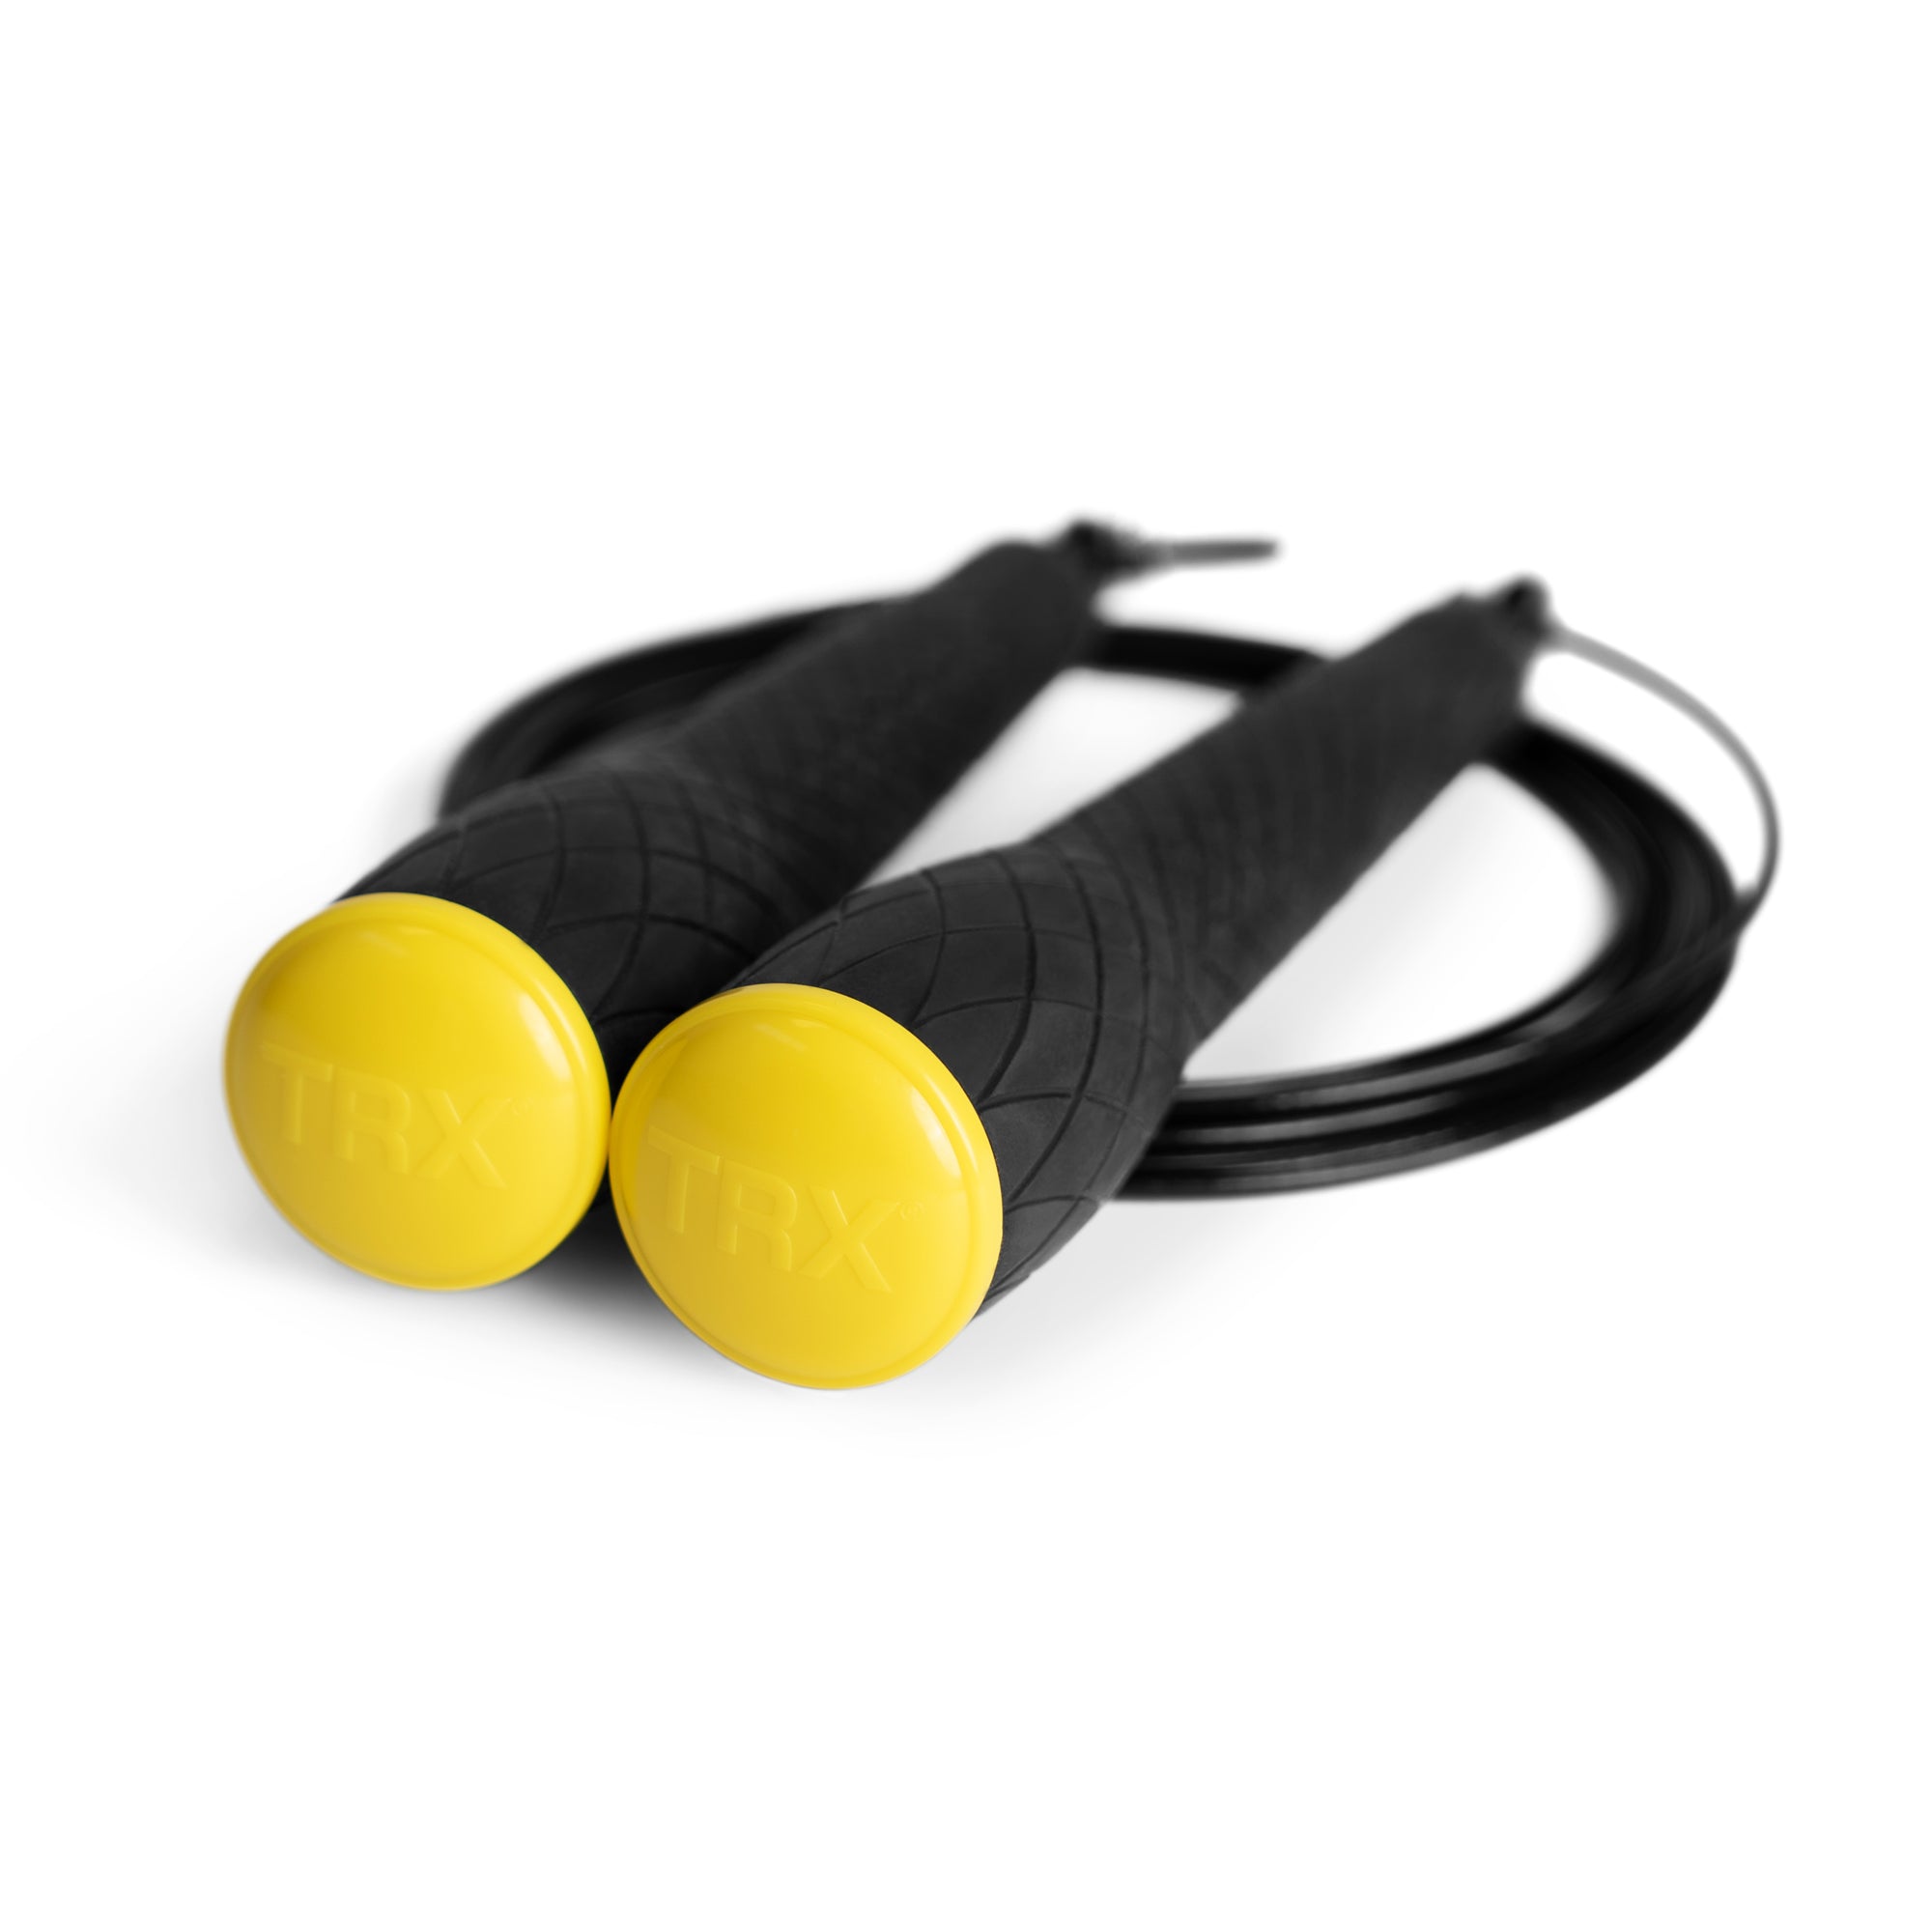 New Gear Drop: 2 New TRX® Jump Ropes and Why You Need Them For Full-Body Workouts